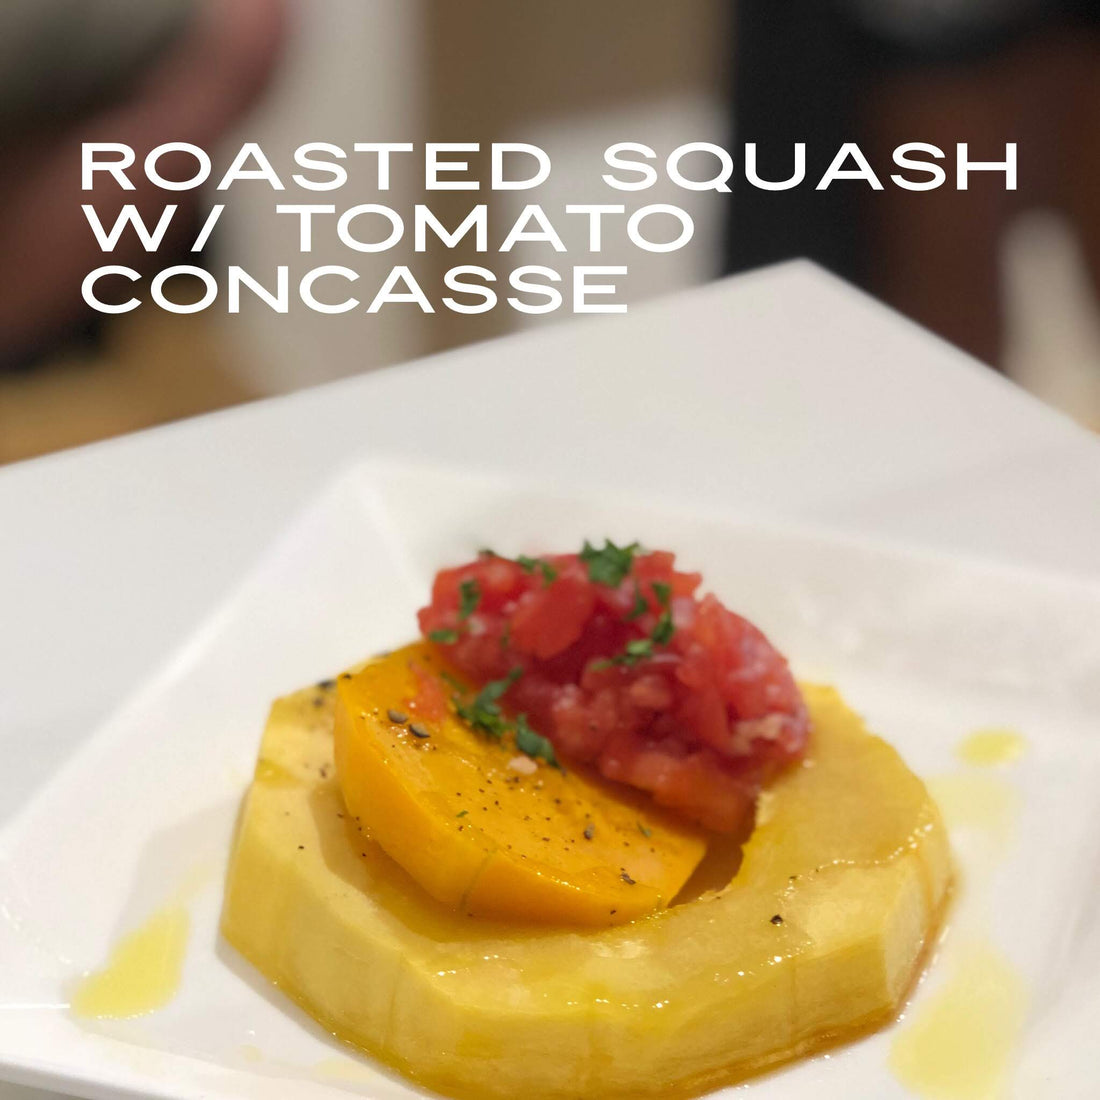 Roasted Squash with Tomato Concasse